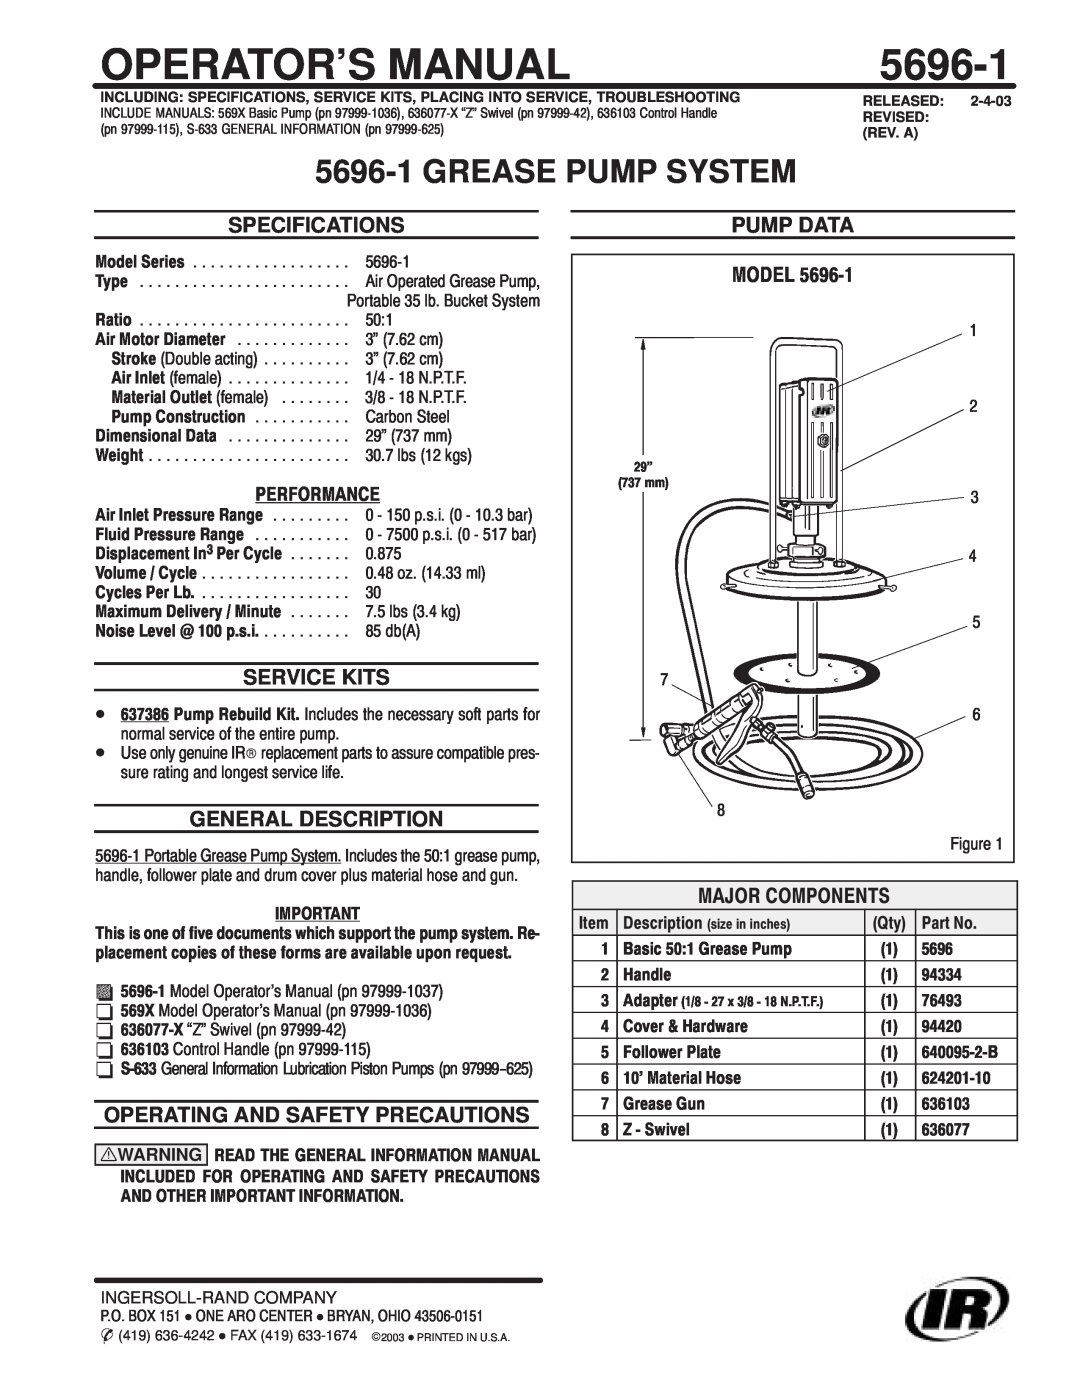 Ingersoll-Rand 5696-1 specifications Service Kits, General Description, Operating And Safety Precautions, Pump Data, Model 